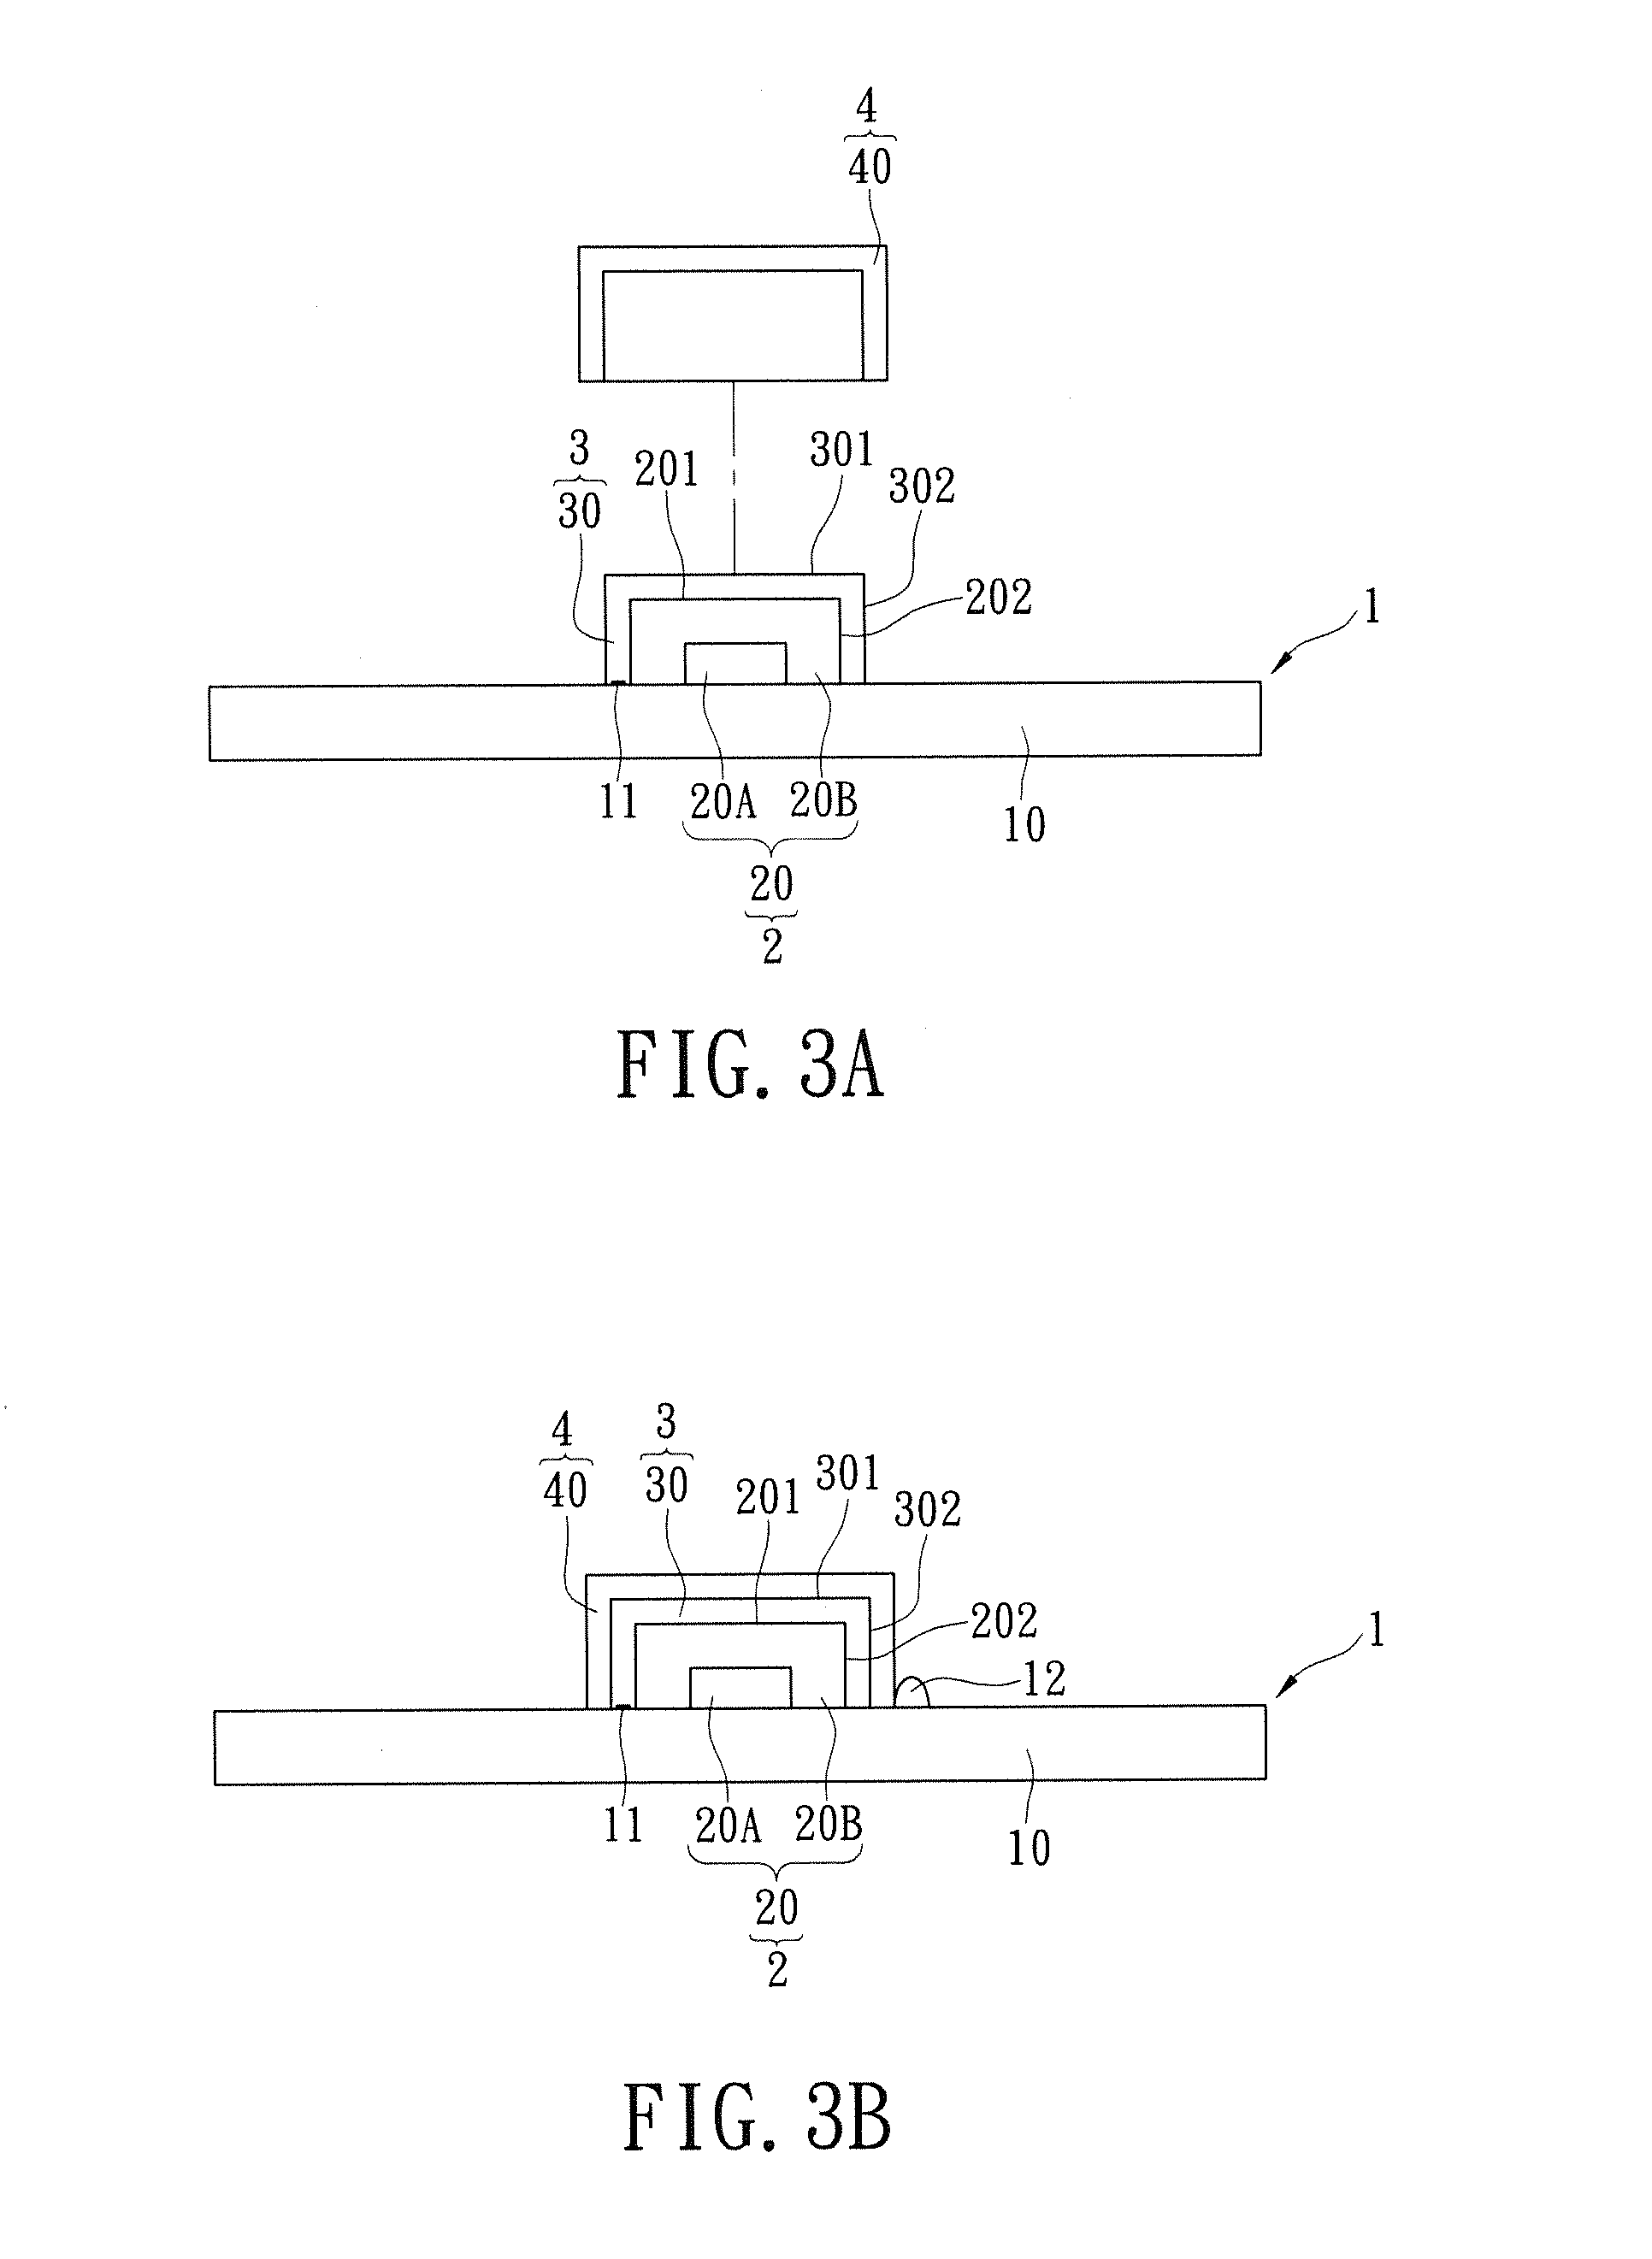 Module IC package structure having a metal shielding function for preventing electrical malfunction induced by short-circuit